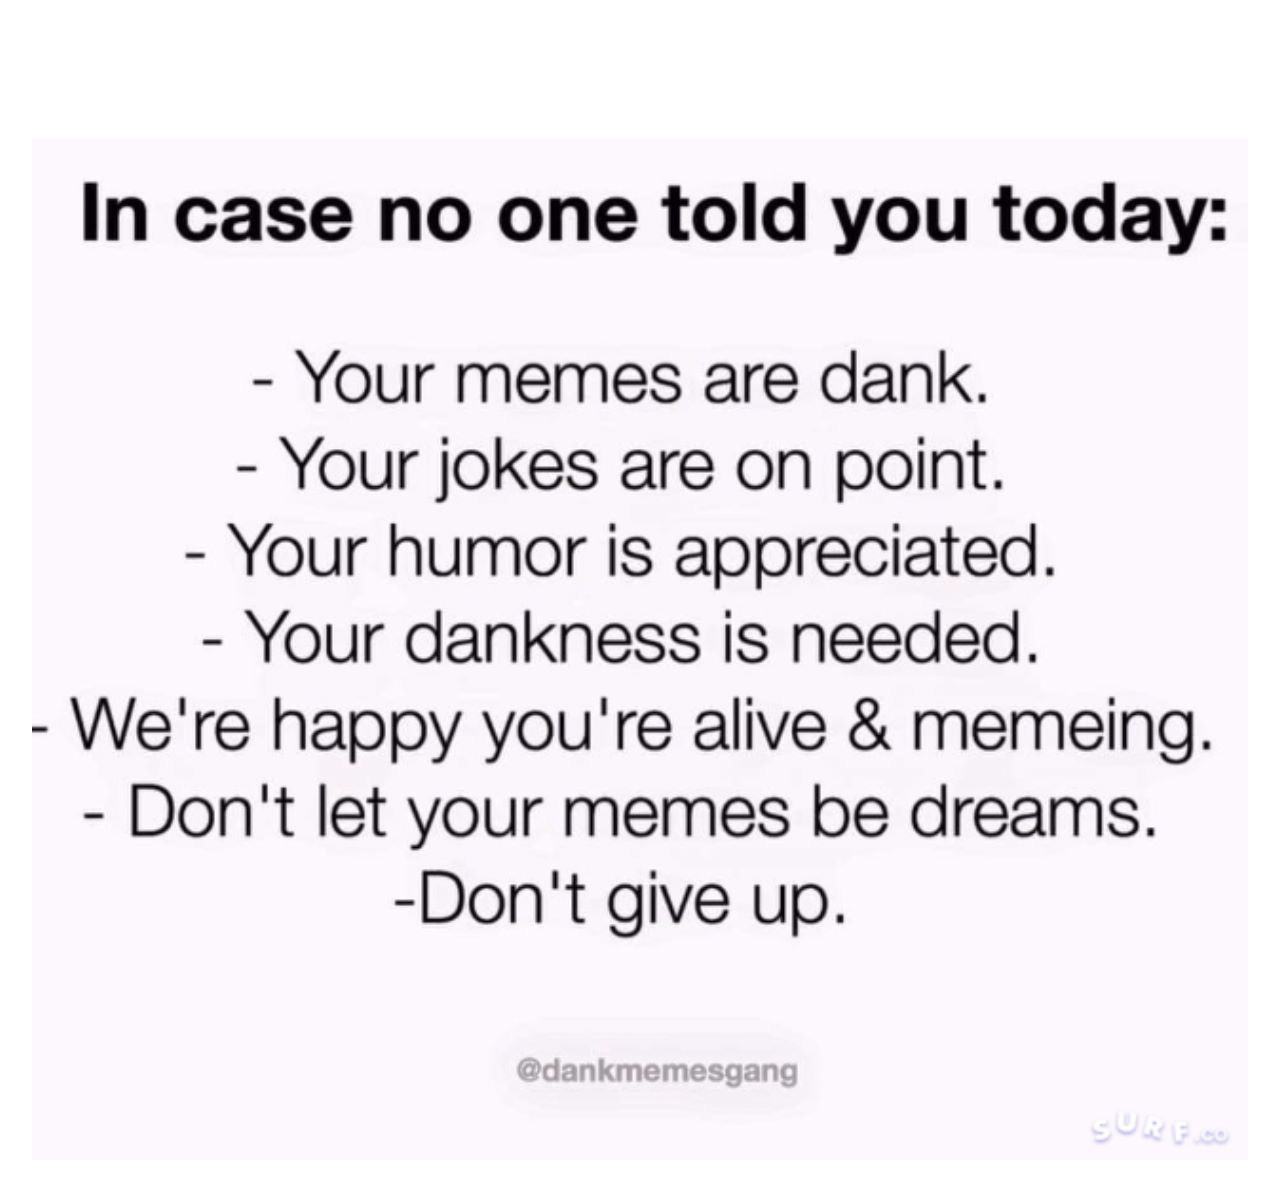 case noone has told you meme - In case no one told you today Your memes are dank. Your jokes are on point. Your humor is appreciated. Your dankness is needed. We're happy you're alive & memeing. Don't let your memes be dreams. Don't give up.